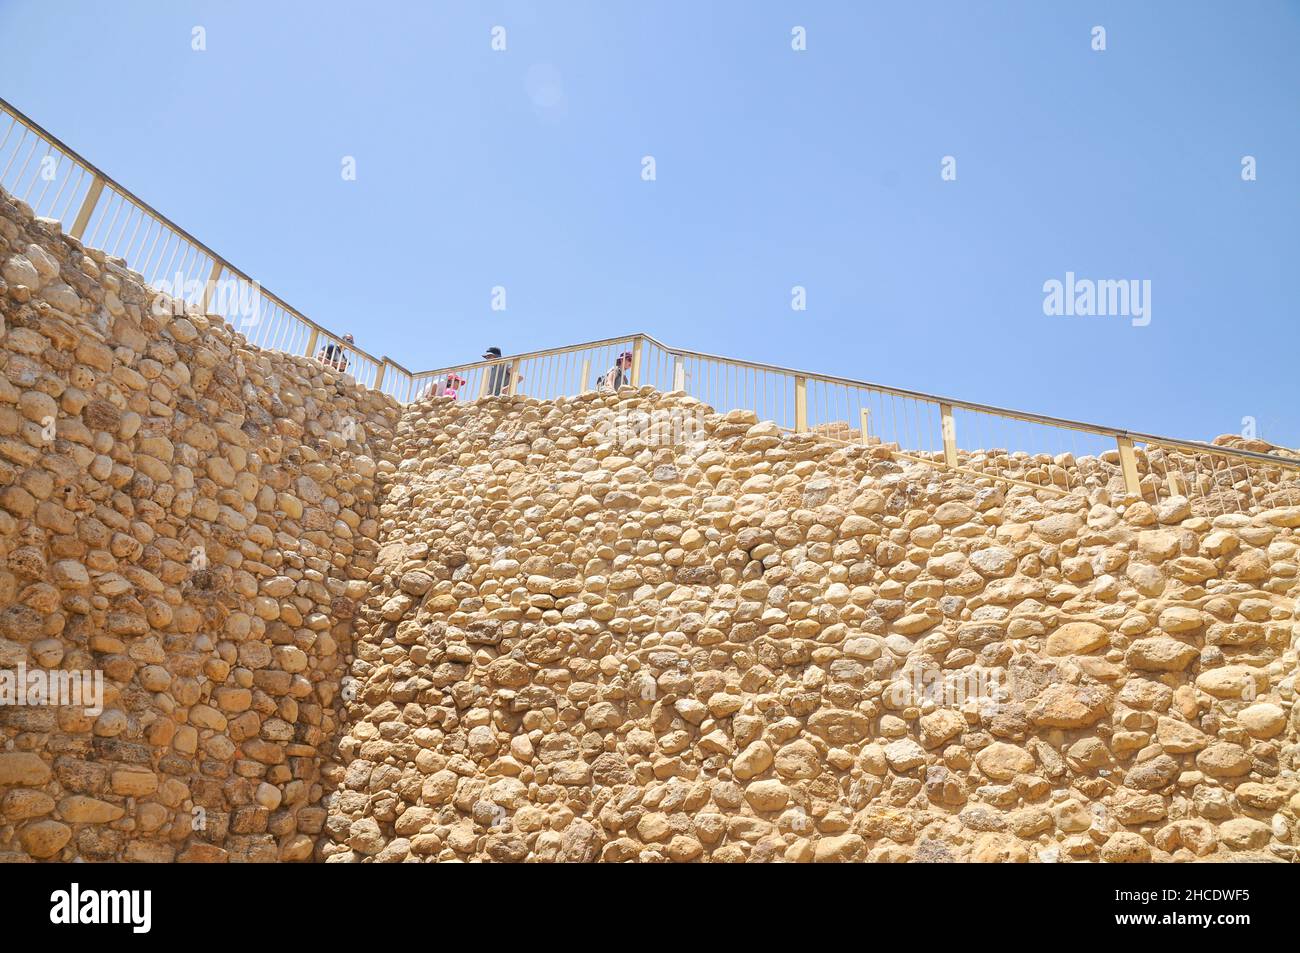 Israel, Negev, Tel Be'er Sheva believed to be the remains of the biblical town of Be'er Sheva. The water system collected flood water from the nearby Stock Photo